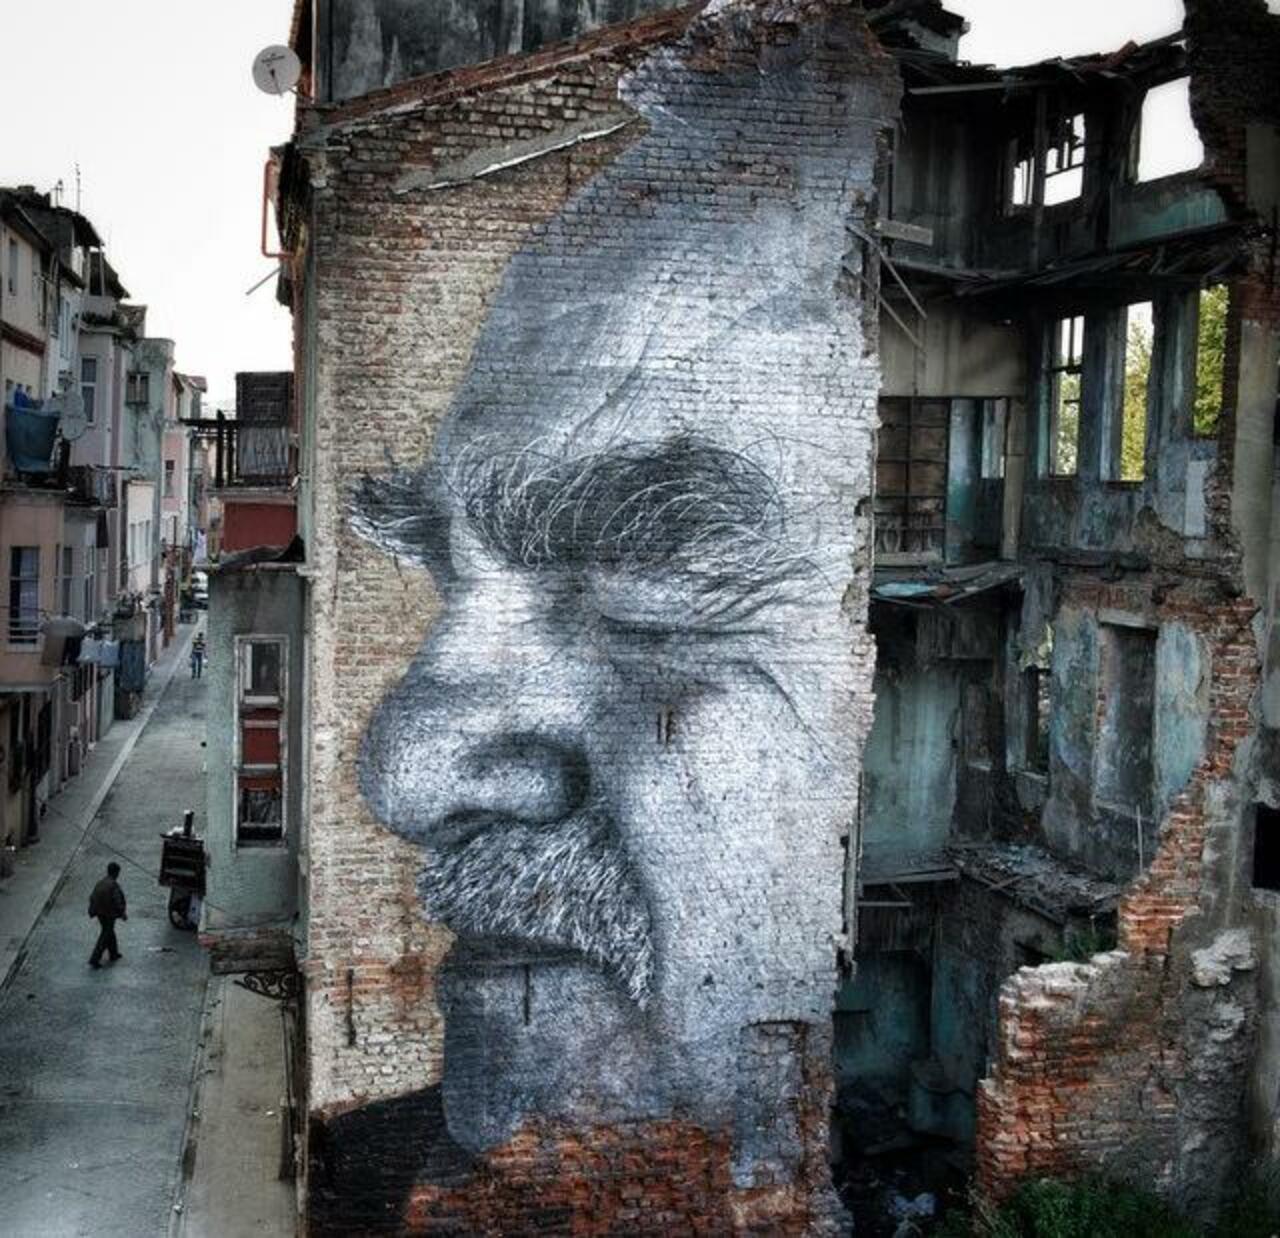 Street Art by JR in Istanbul & after local police painted over it 

#art #arte #graffiti #streetart http://t.co/WYrjl0C5ER